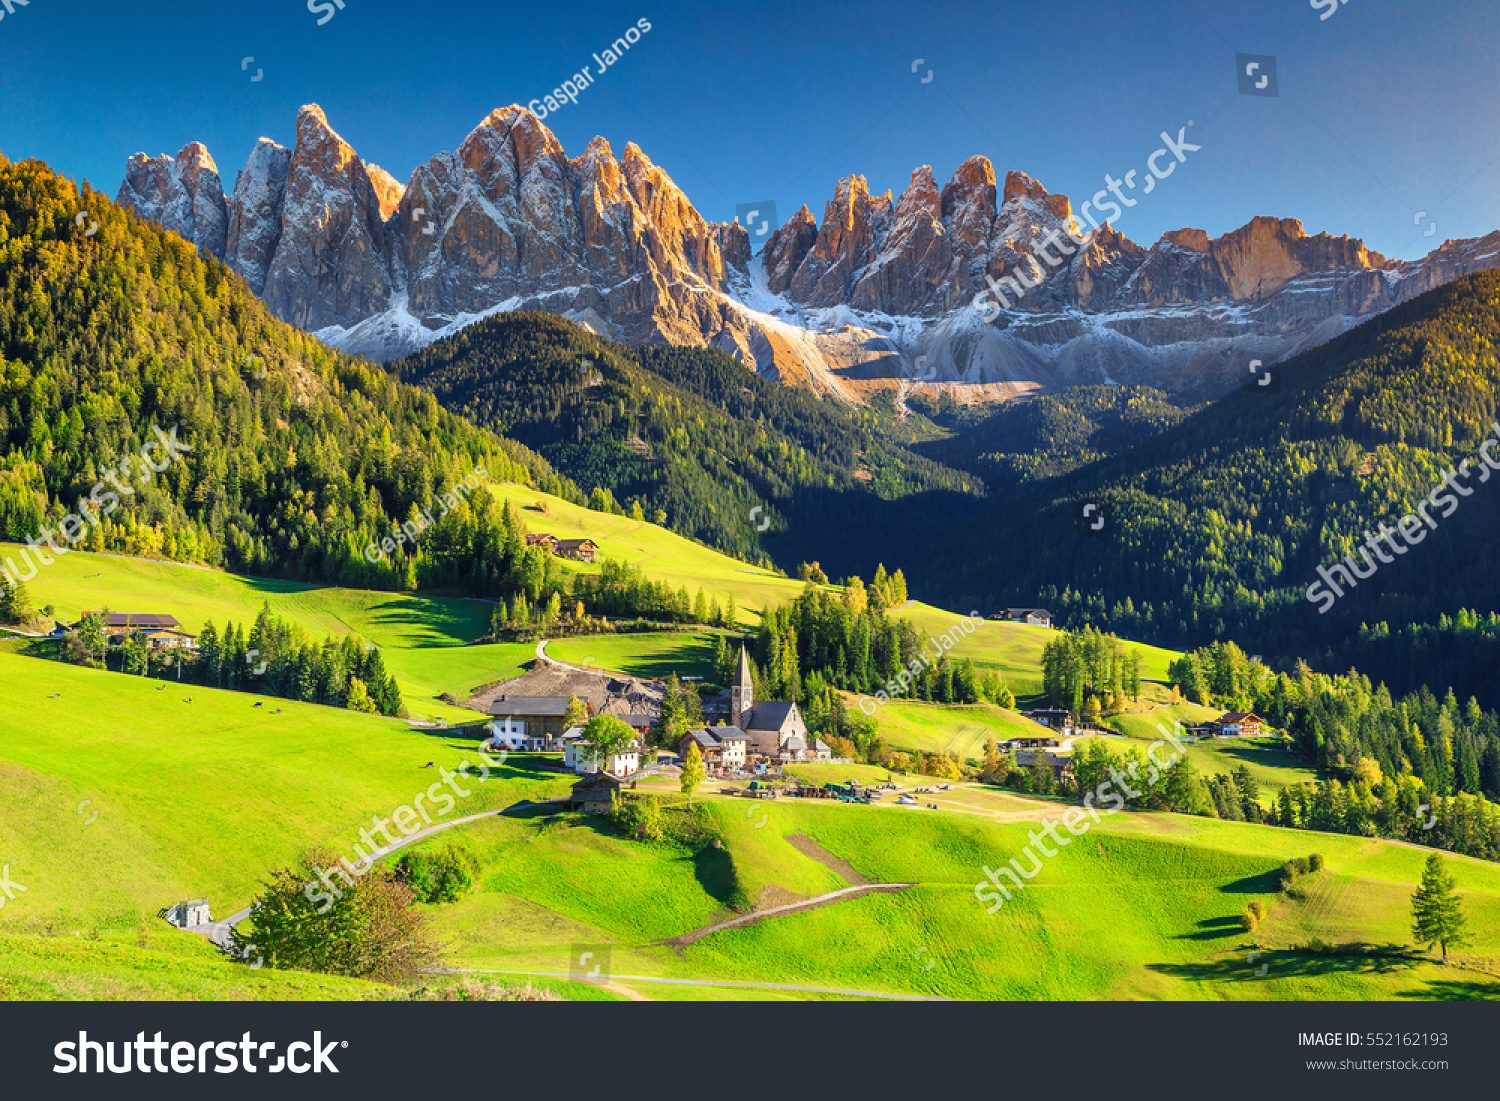 Famous best alpine place of the world, Santa Maddalena village with magical Dolomites mountains in background, Val di Funes valley, Trentino Alto Adige region, Italy, Europe #552162193